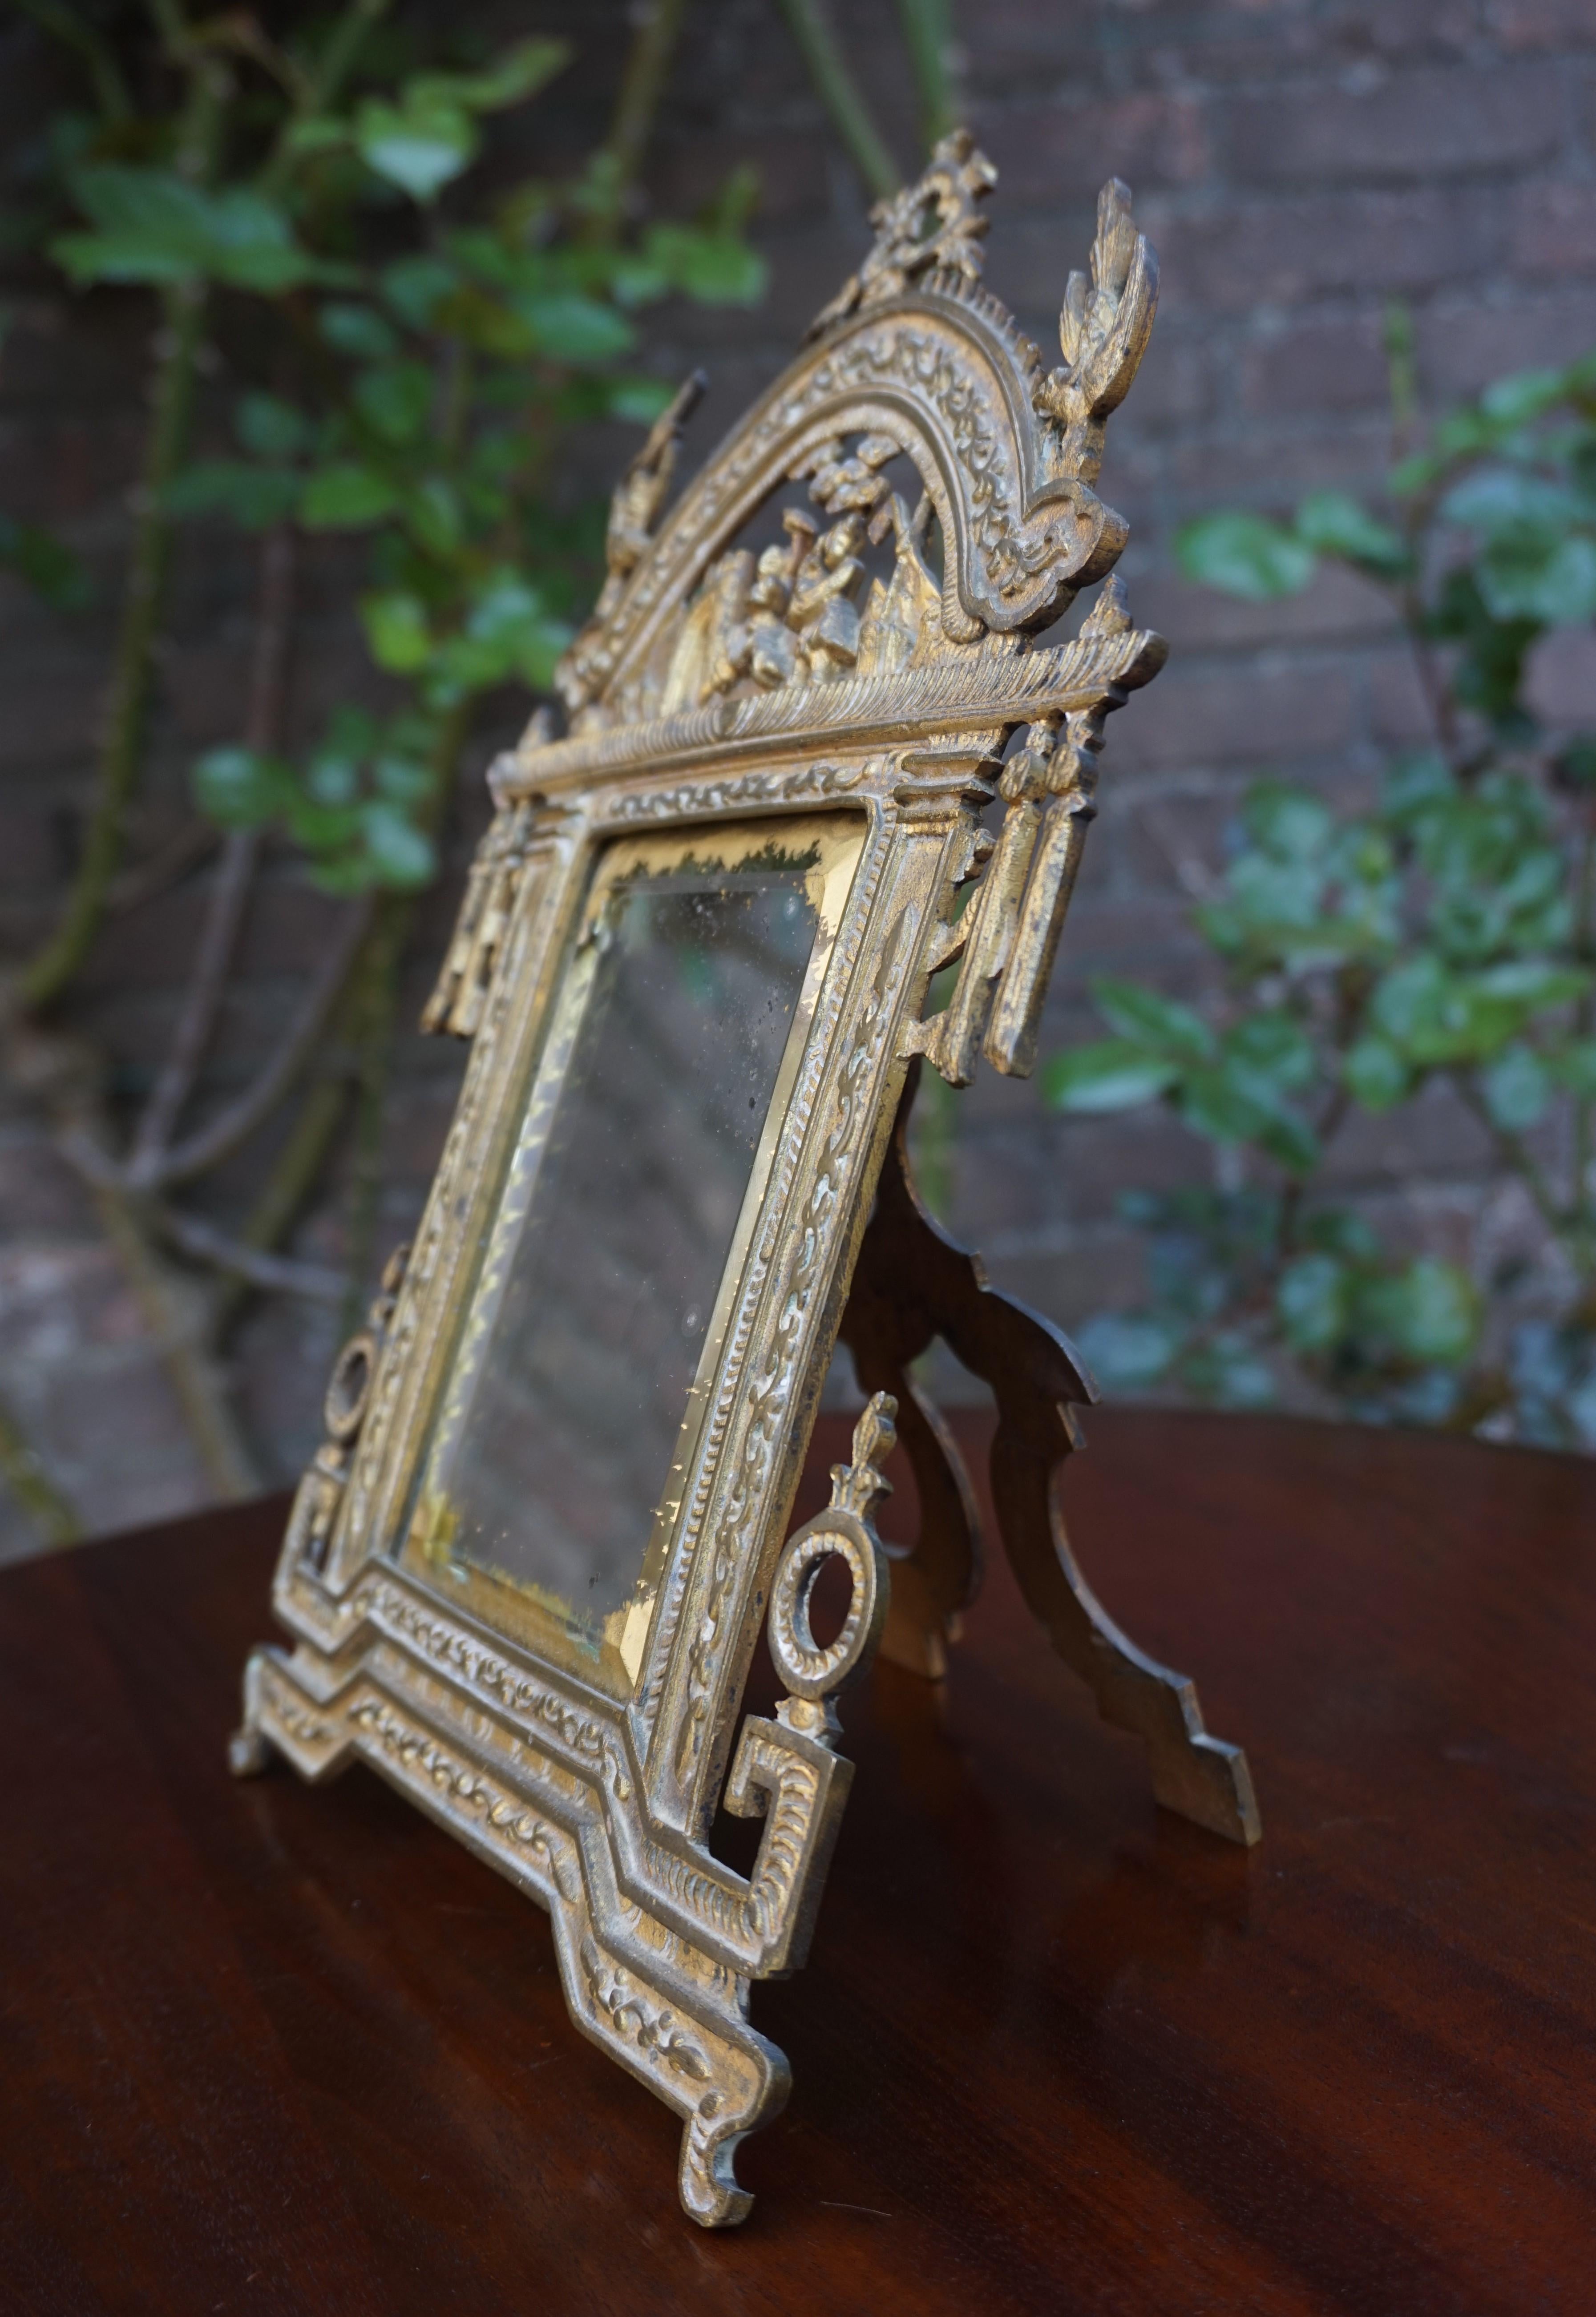 Highly decorative and rare table mirror with classical Chinese decor.

In all our years in this trade we never came accross an antique, Chinese table mirror. Since we cannot find another one anywhere in the world, we have nothing to compare it to.